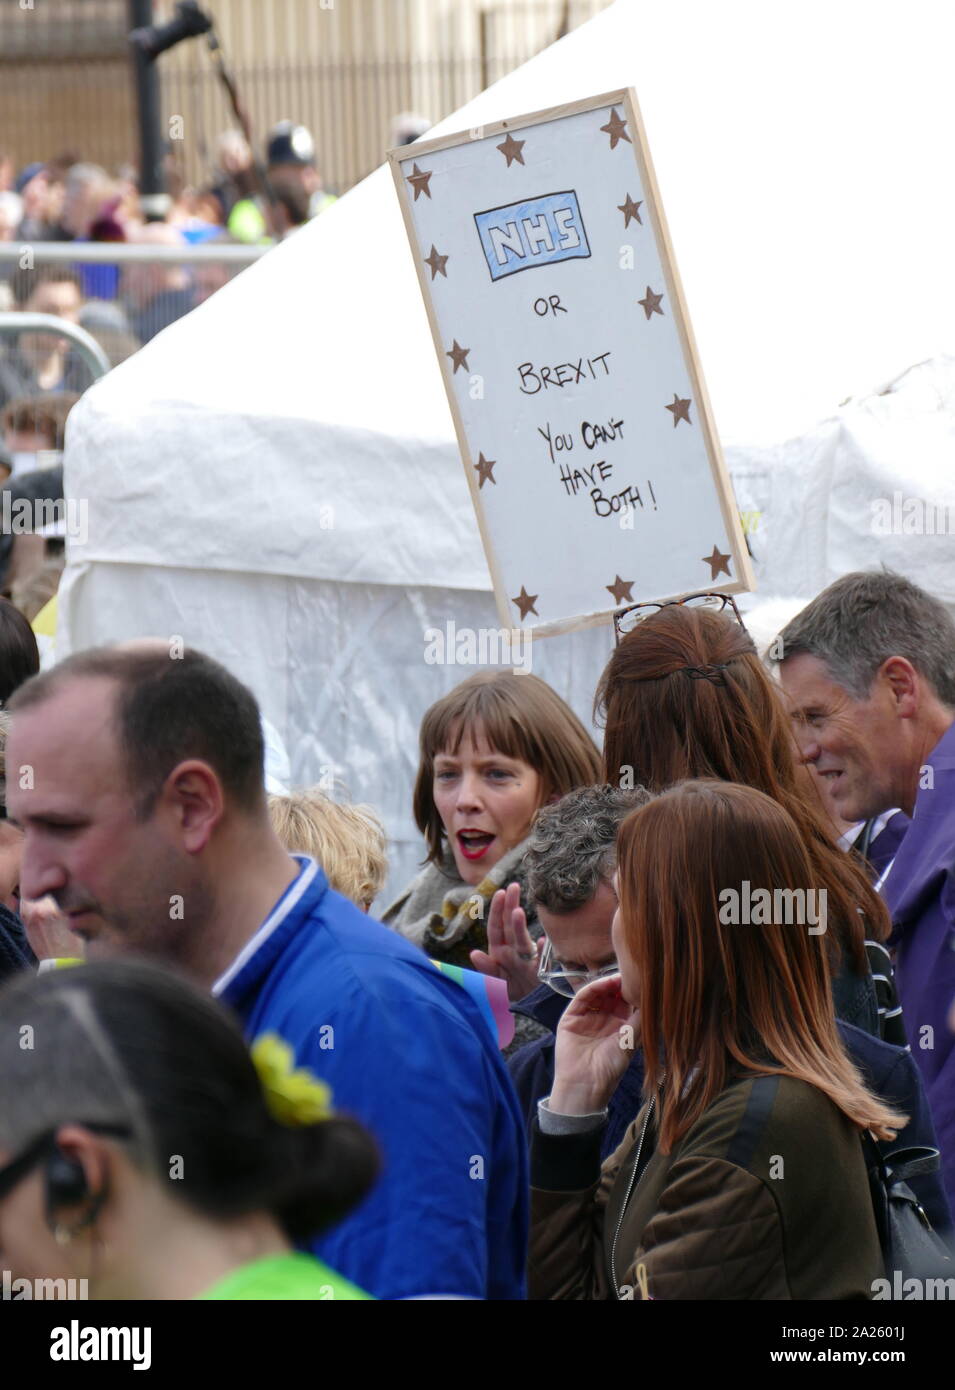 Jess Phillips, Labour Member of Parliament (MP) for Birmingham Yardley, at the 'People's Vote' march in Parliament Square, London. The People's Vote march took place in London on 23 March 2019 as part of a series of demonstrations to protest against Brexit, call for a new referendum, and ask the British Government to revoke Article 50. It brought to the capital hundreds of thousands of protestors, or over a million people according to the organizers. Stock Photo